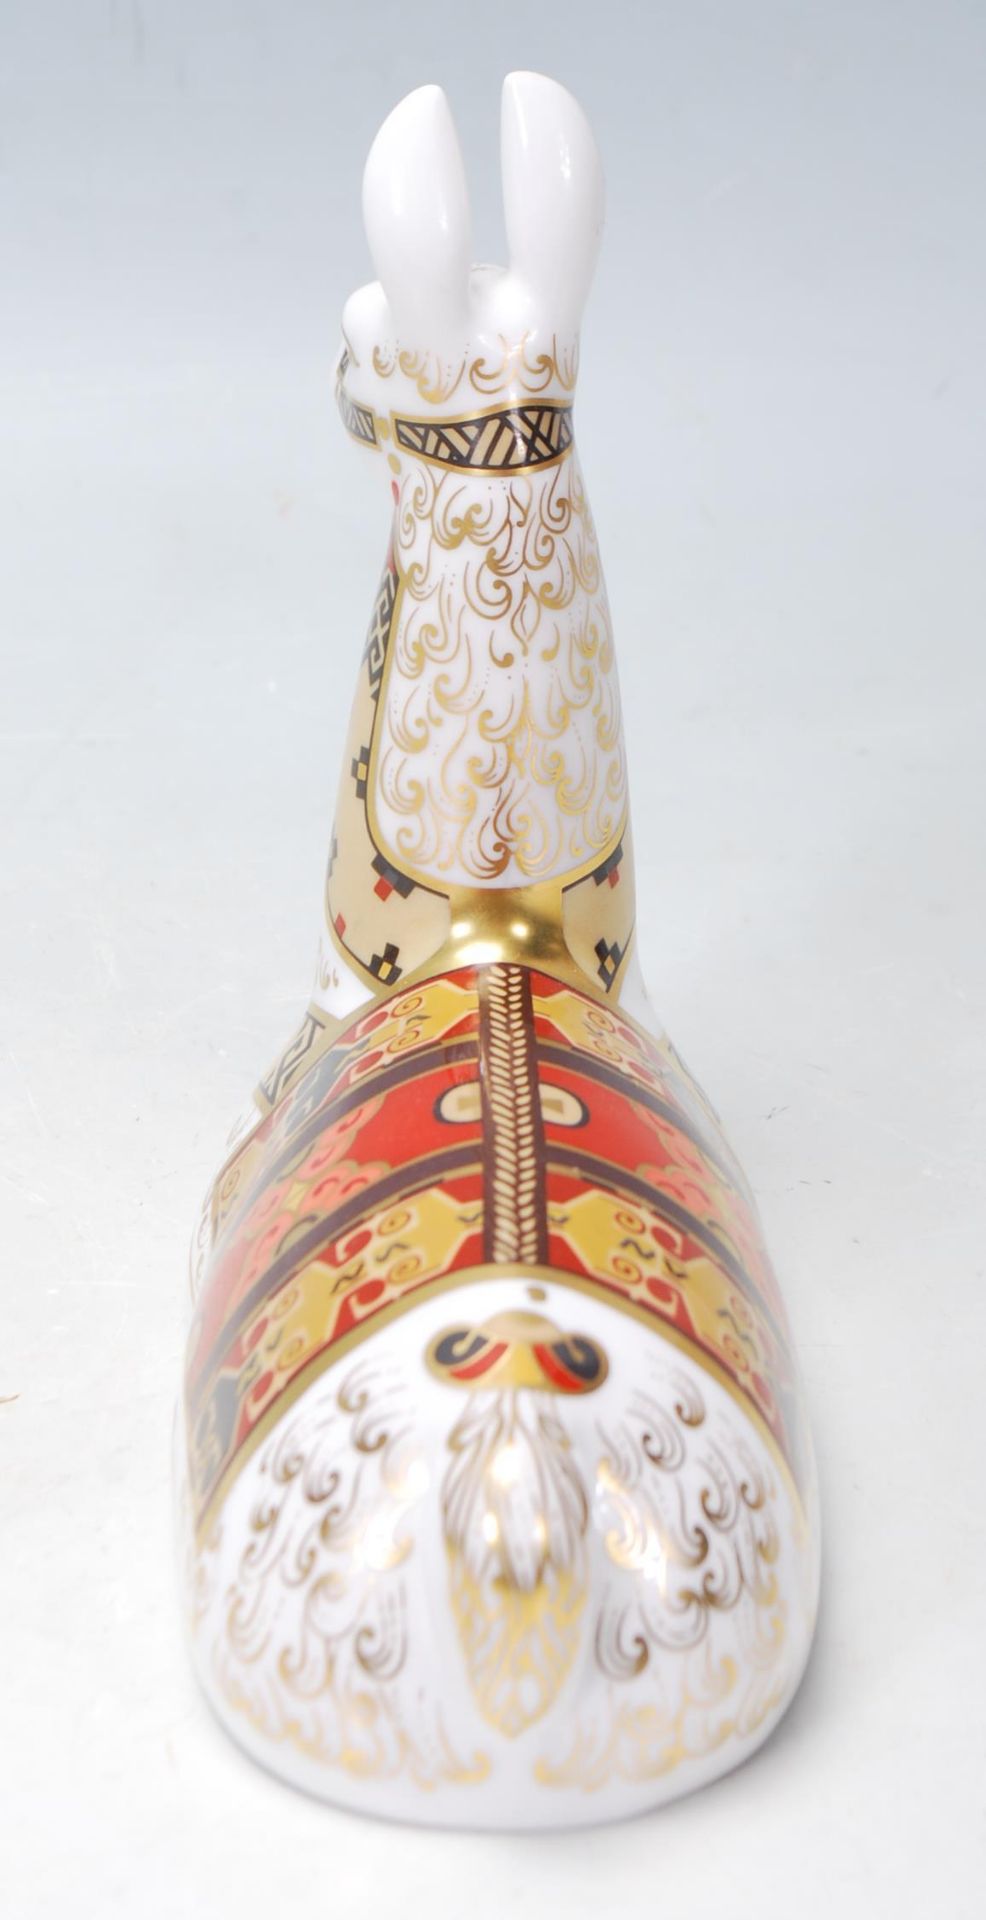 ROYAL CROWN DERBY PAPERWEIGHT IN A FOM OF LLAMA WITH GOLD STOPPER - Image 3 of 5